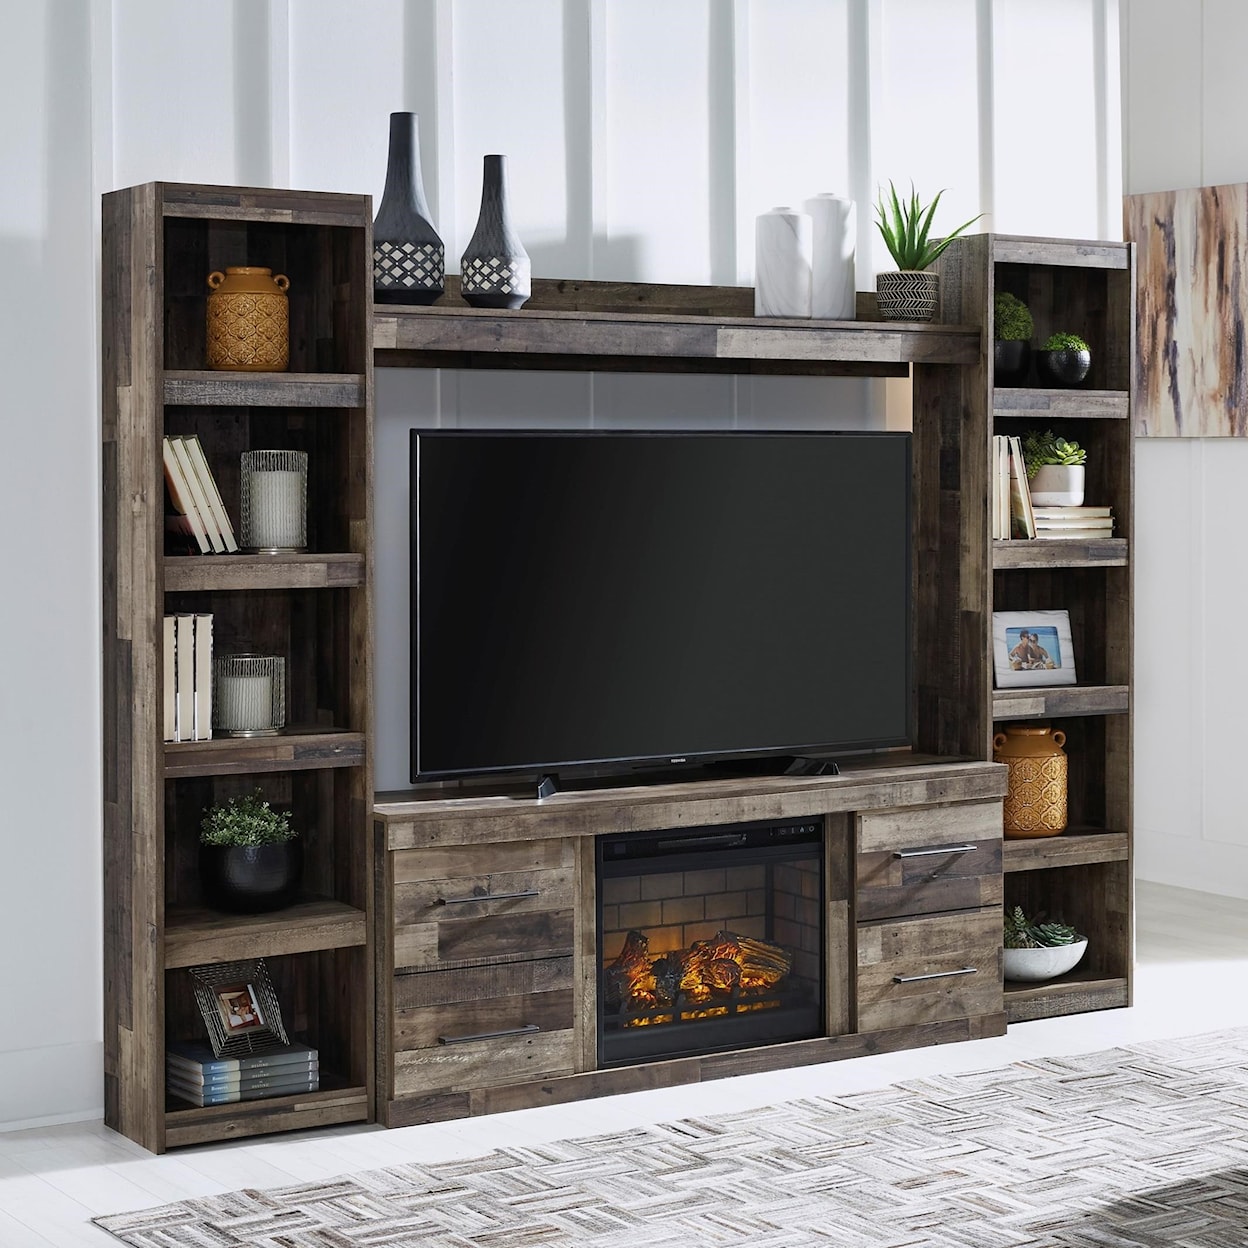 Benchcraft Derekson Entertainment Wall Unit with Fireplace